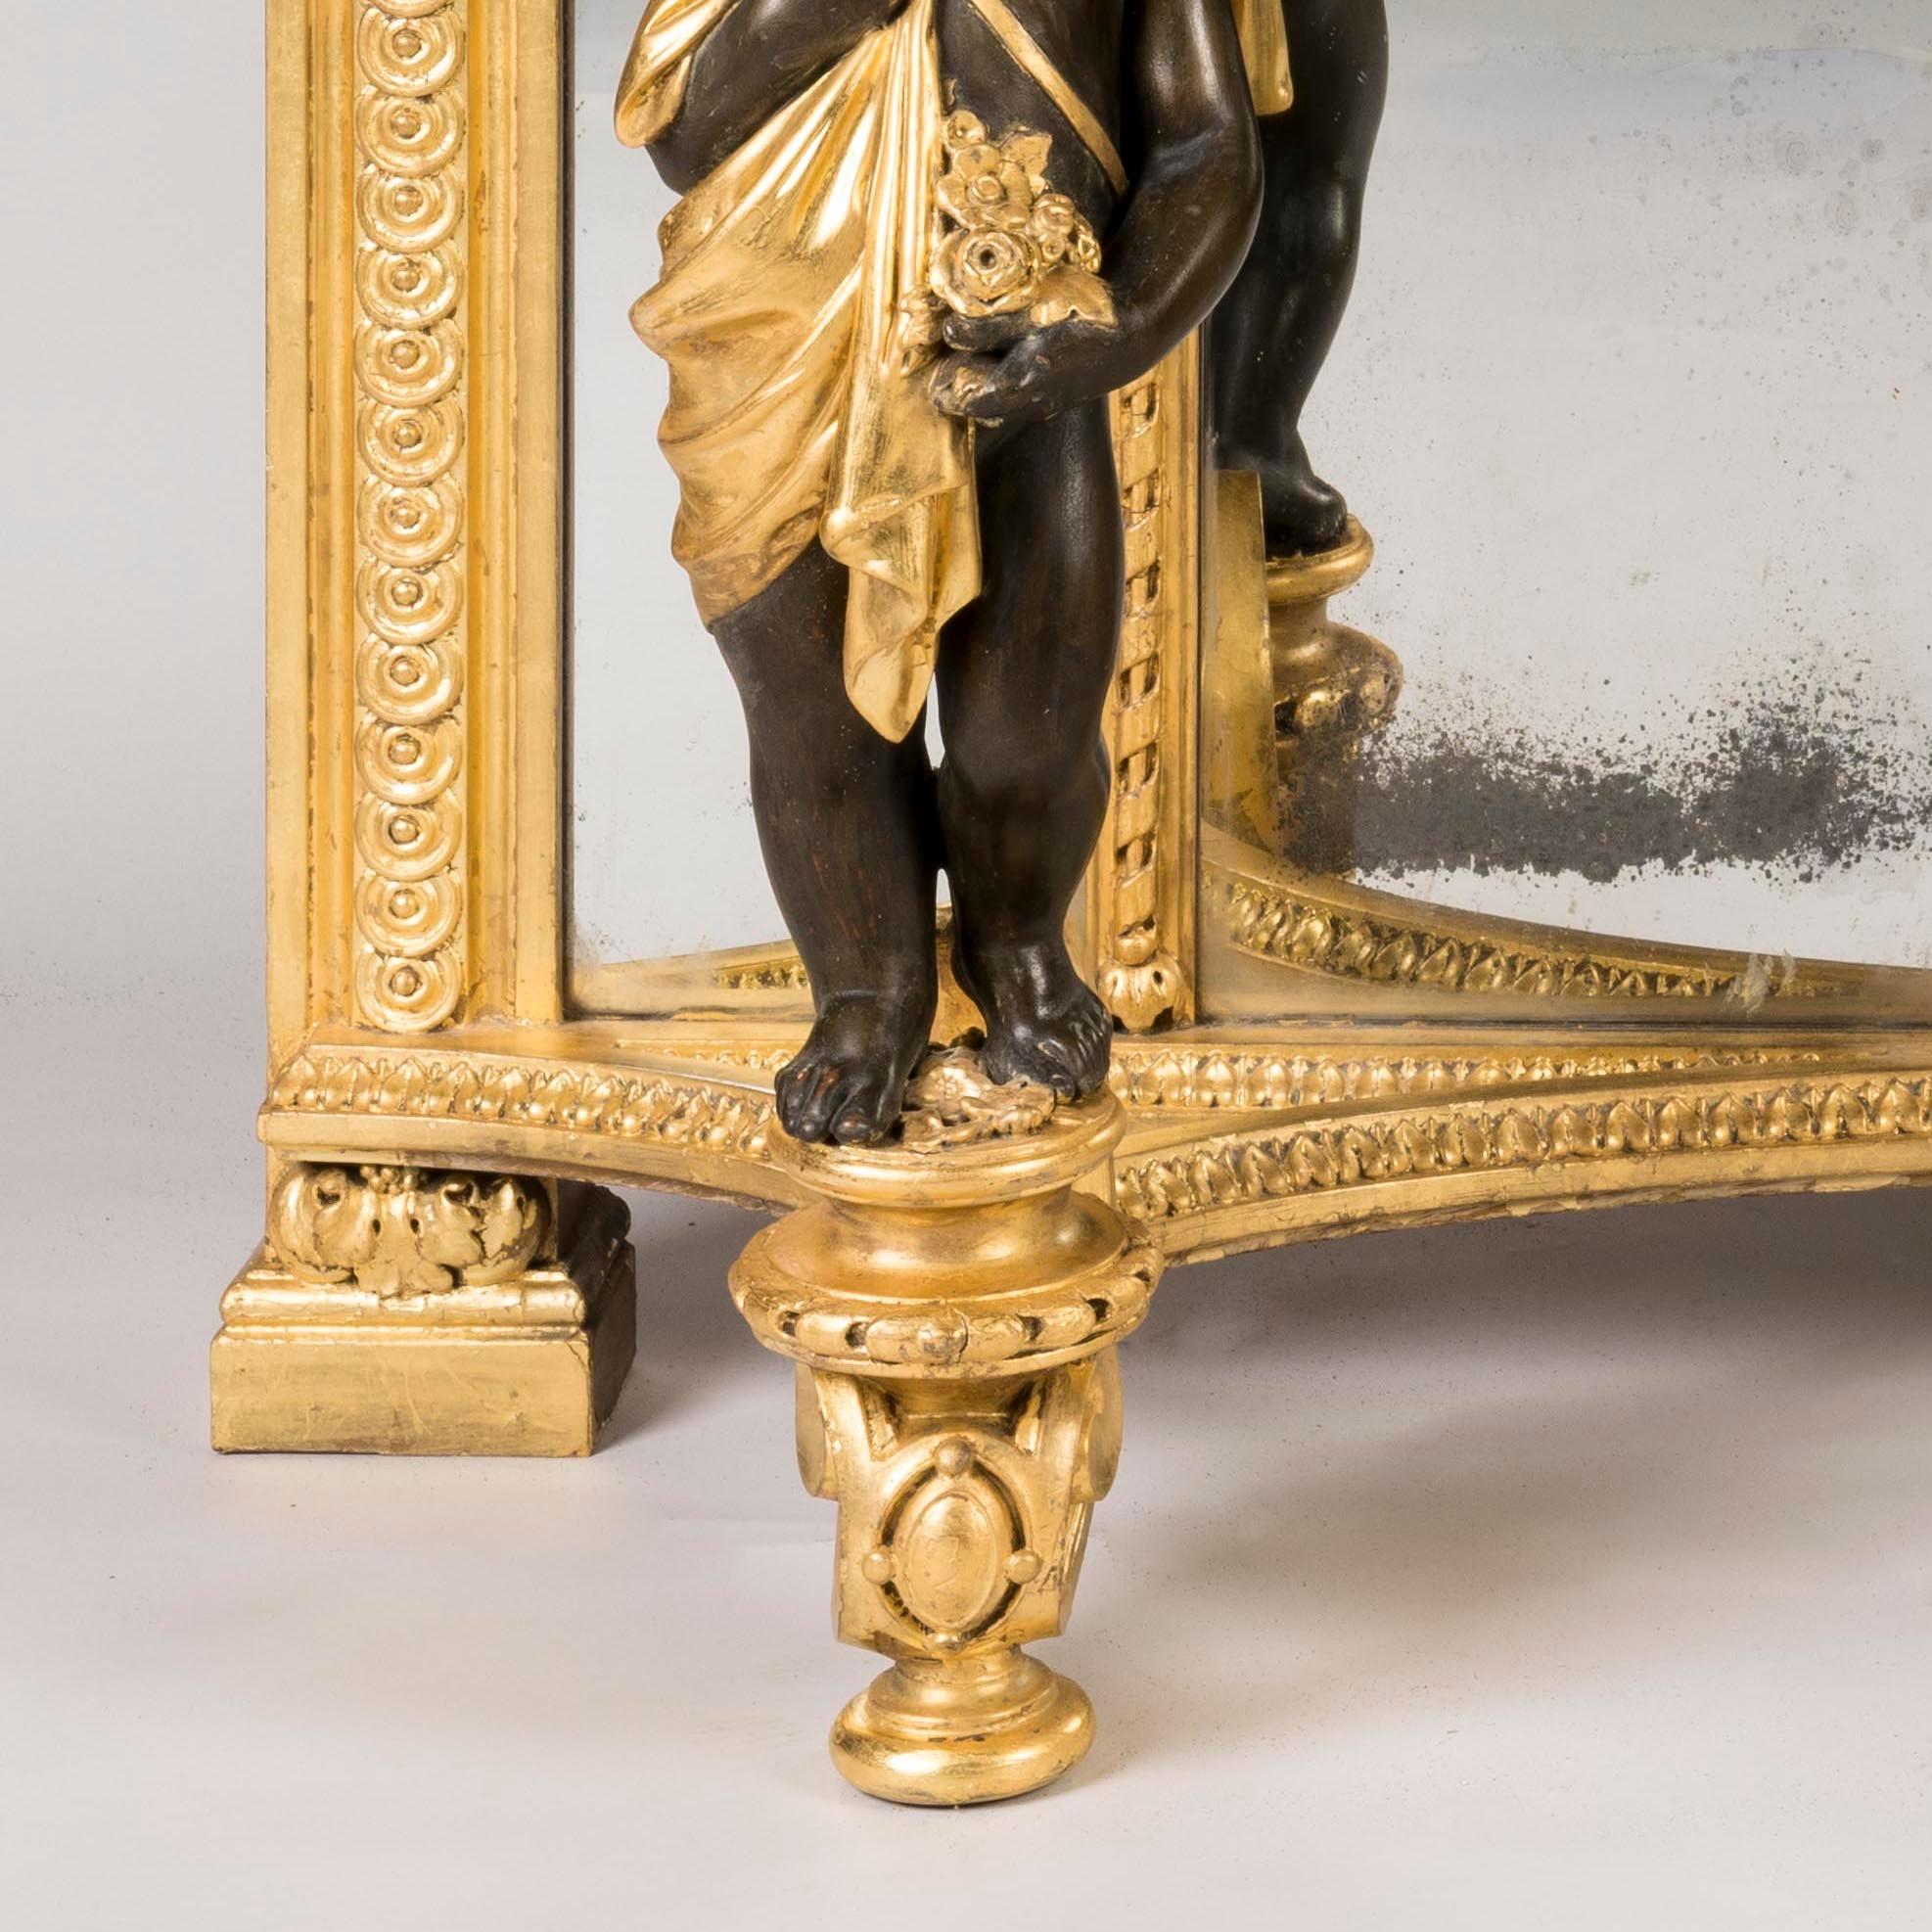 19th Century Italian Giltwood Console Table with Cherubs and Marble Top For Sale 3